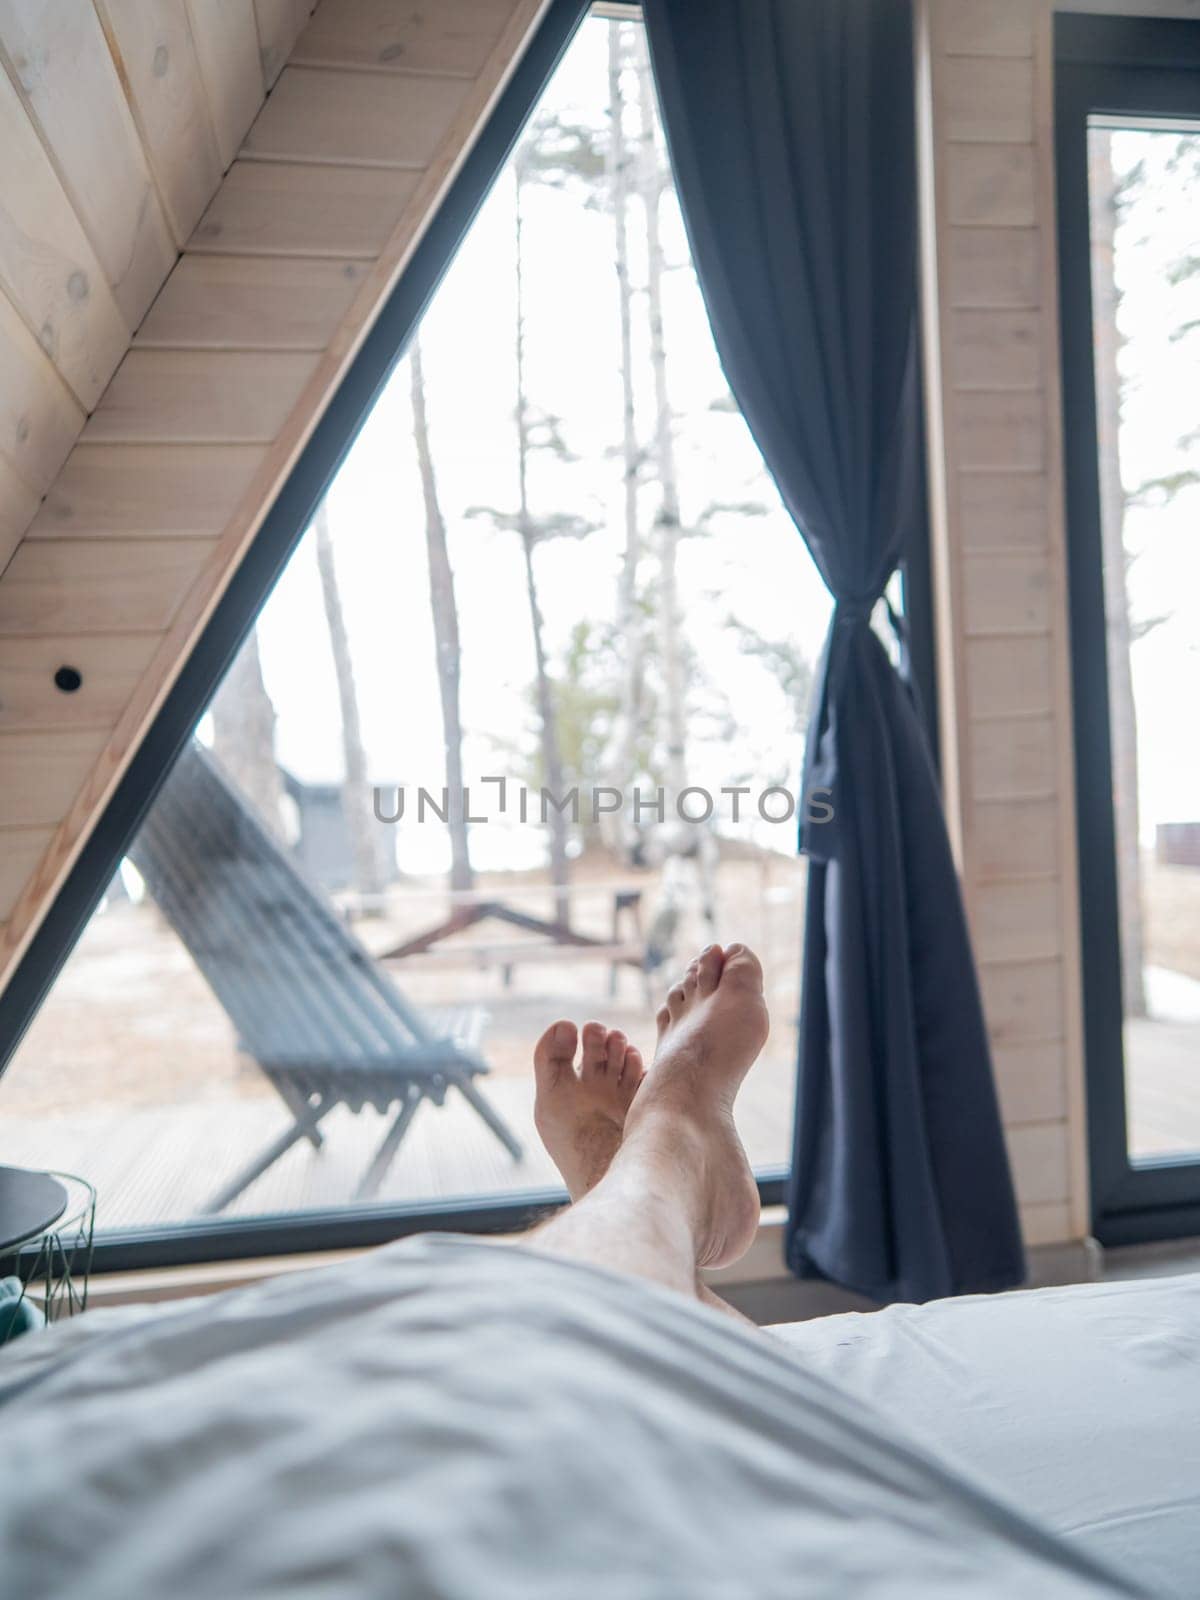 A man's feet sticking out from under a blanket in a country house with panoramic windows. Vertical photo. by mrwed54